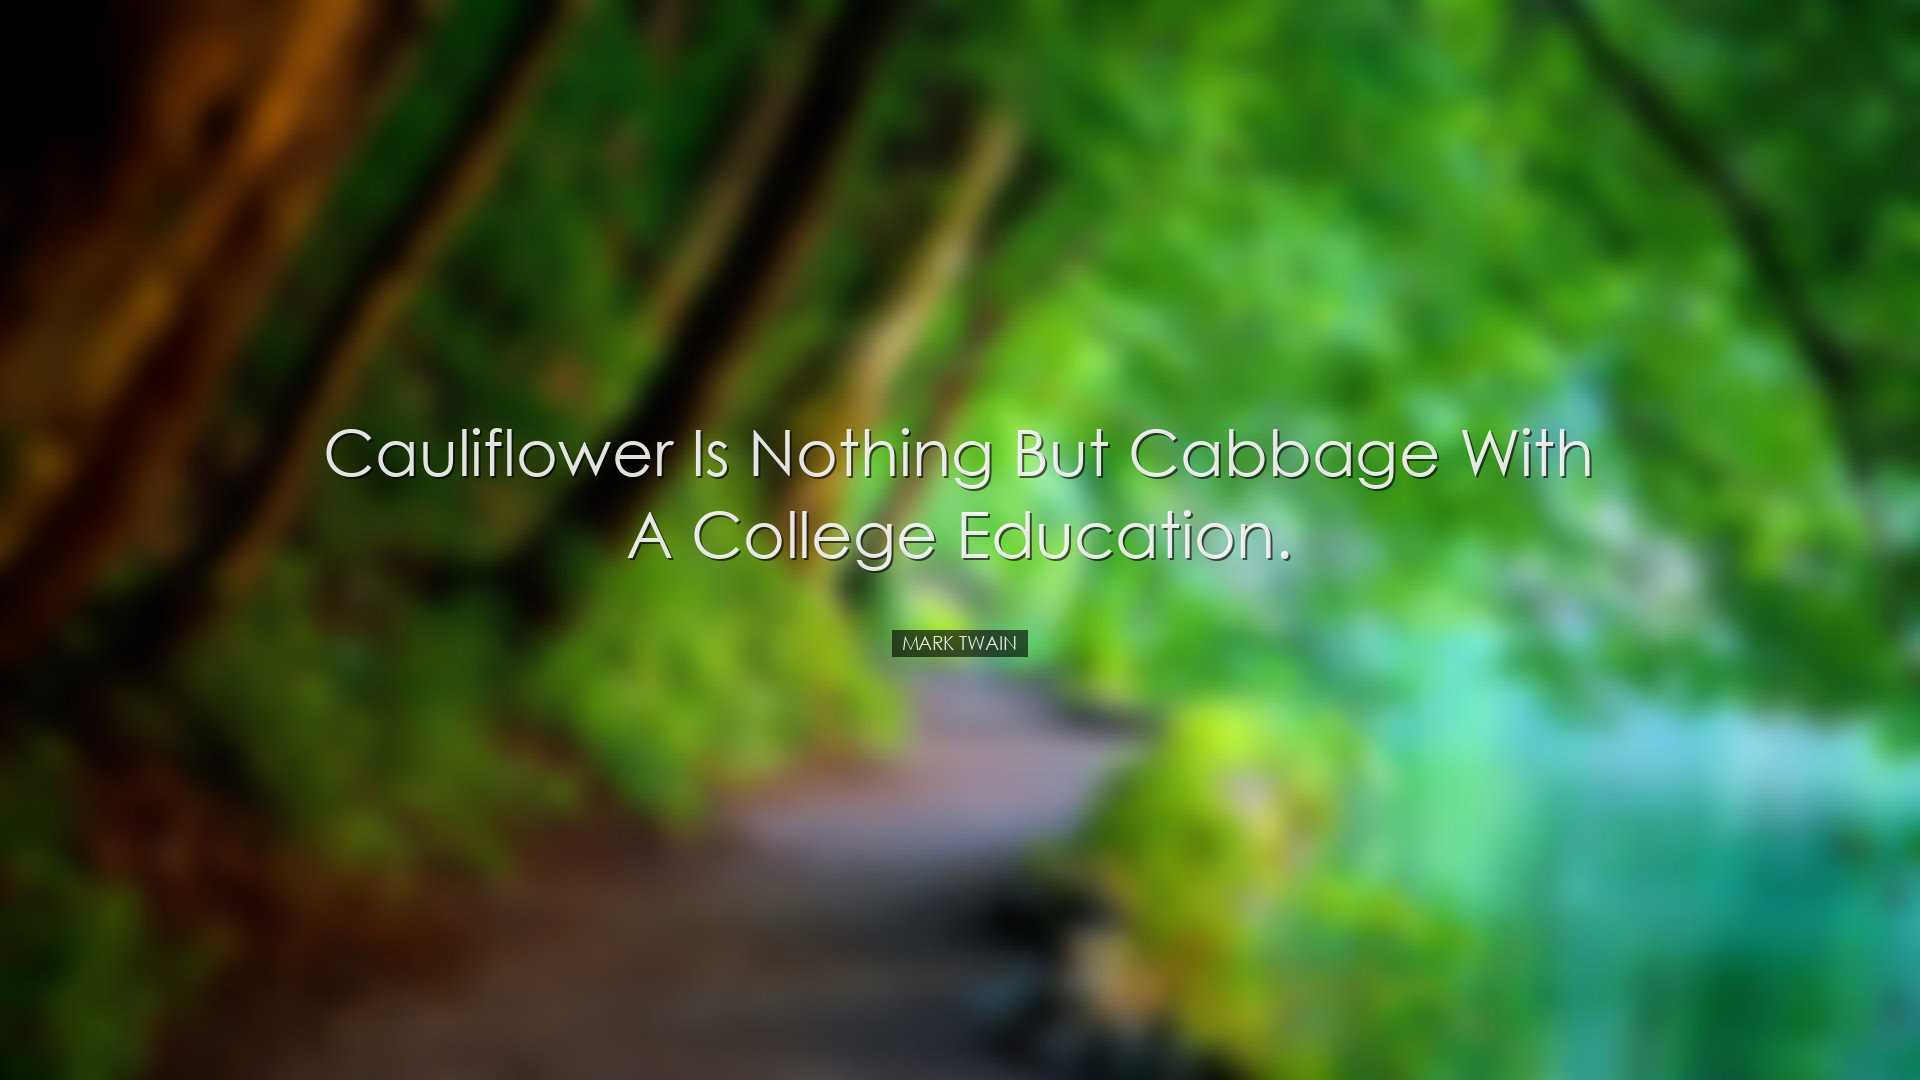 Cauliflower is nothing but cabbage with a college education. - Mar